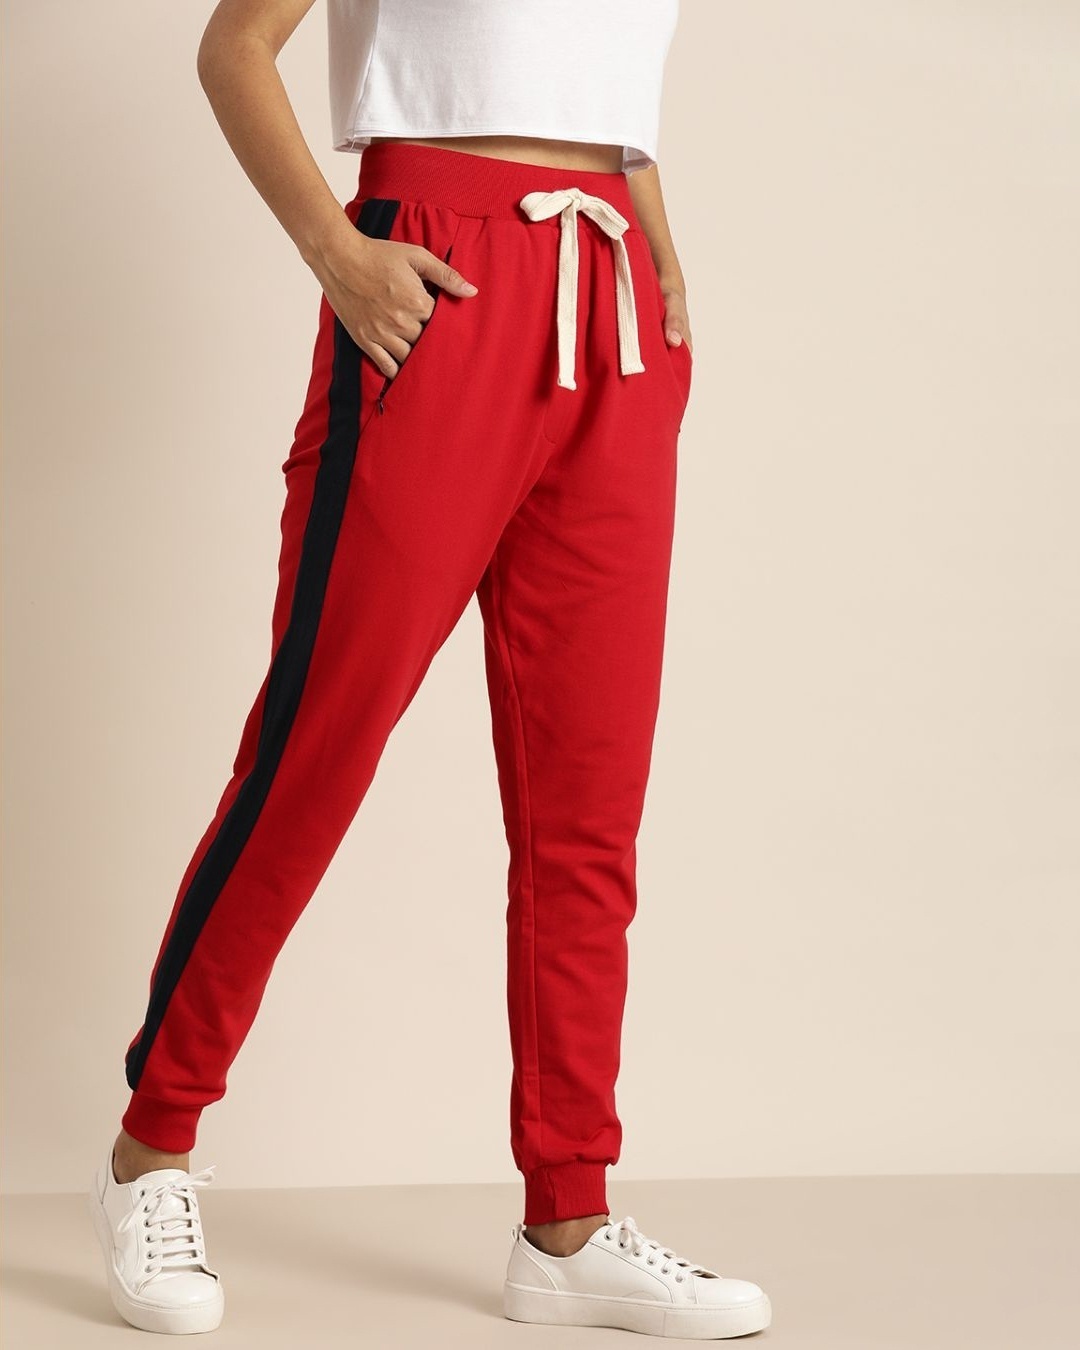 Shop Women's Red Solid Joggers-Design